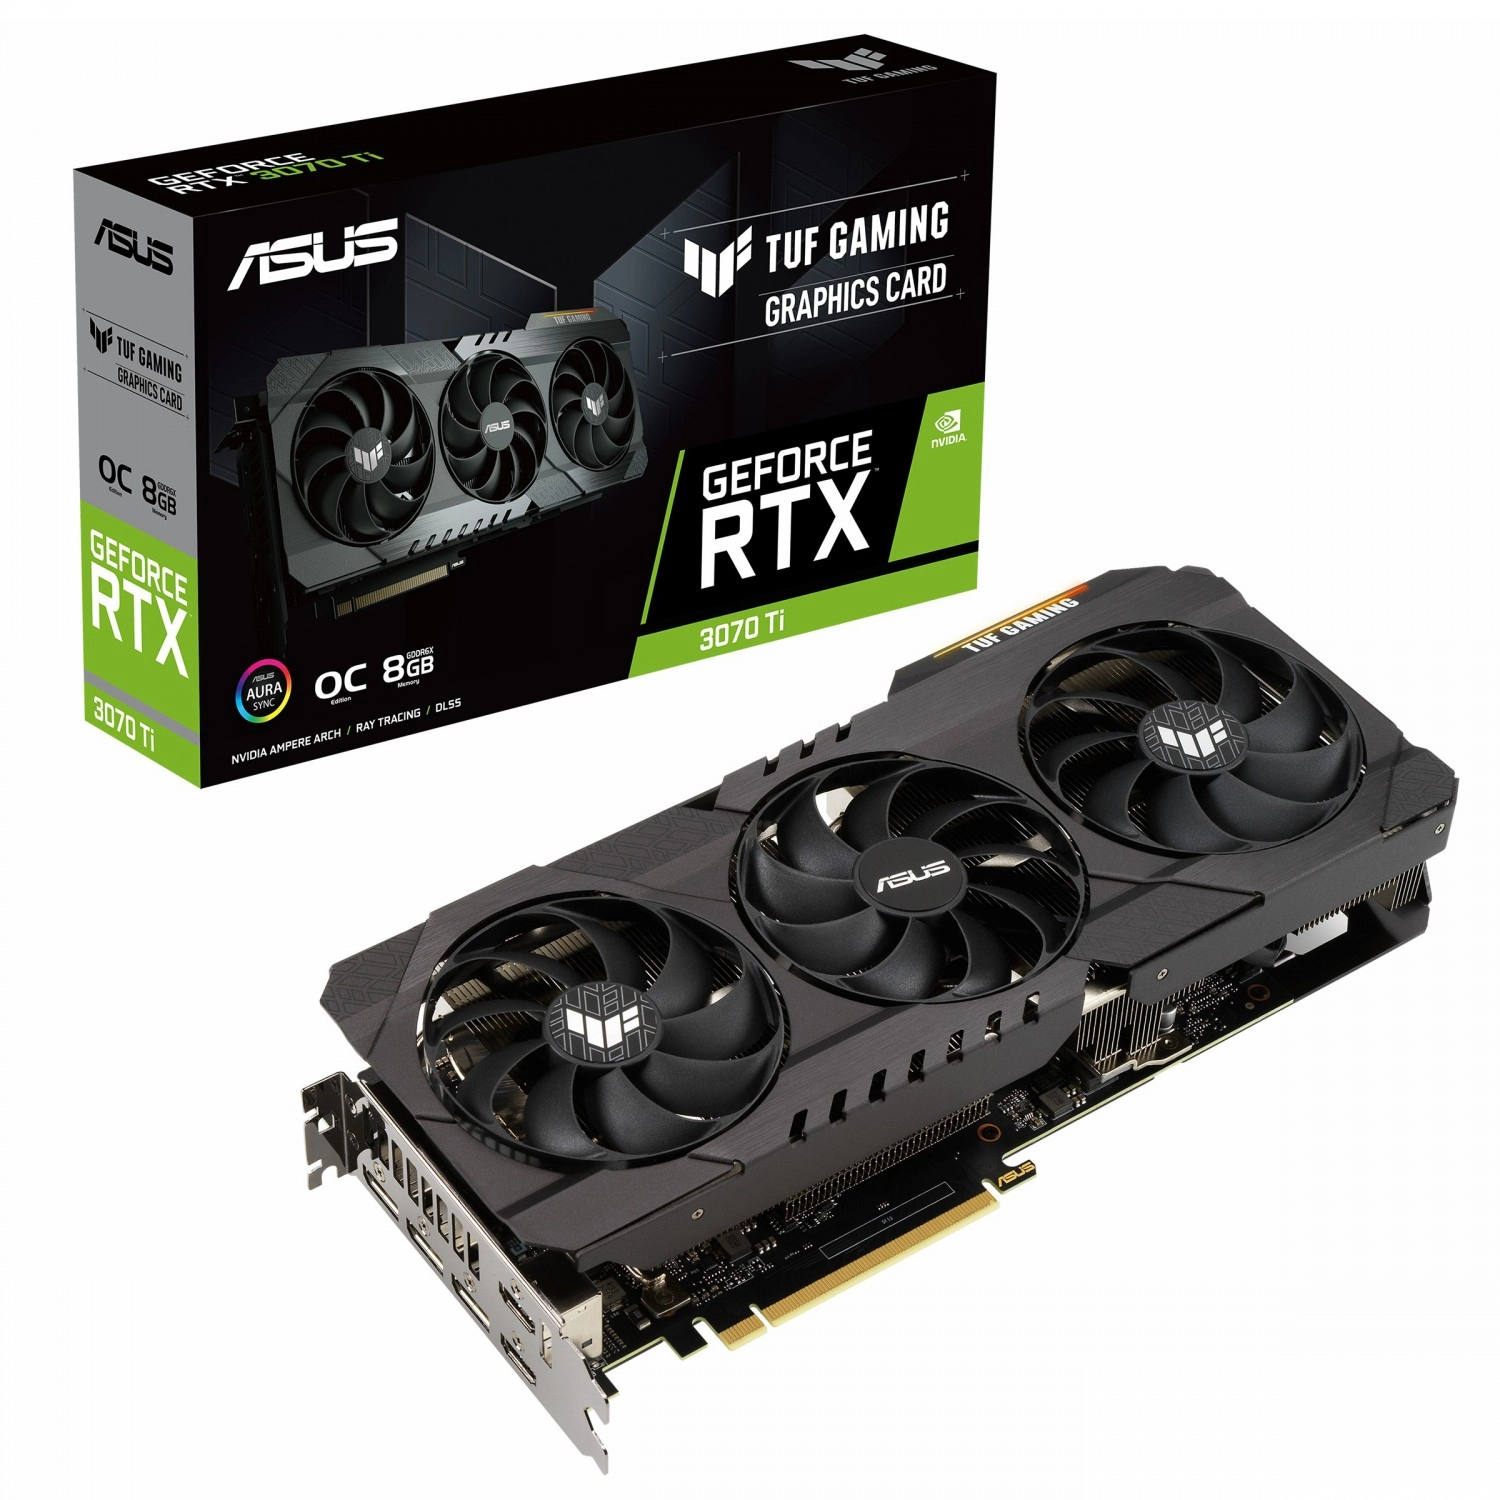 ASUS TUF Gaming GeForce RTX 3070 Ti OC Edition 8GB Package